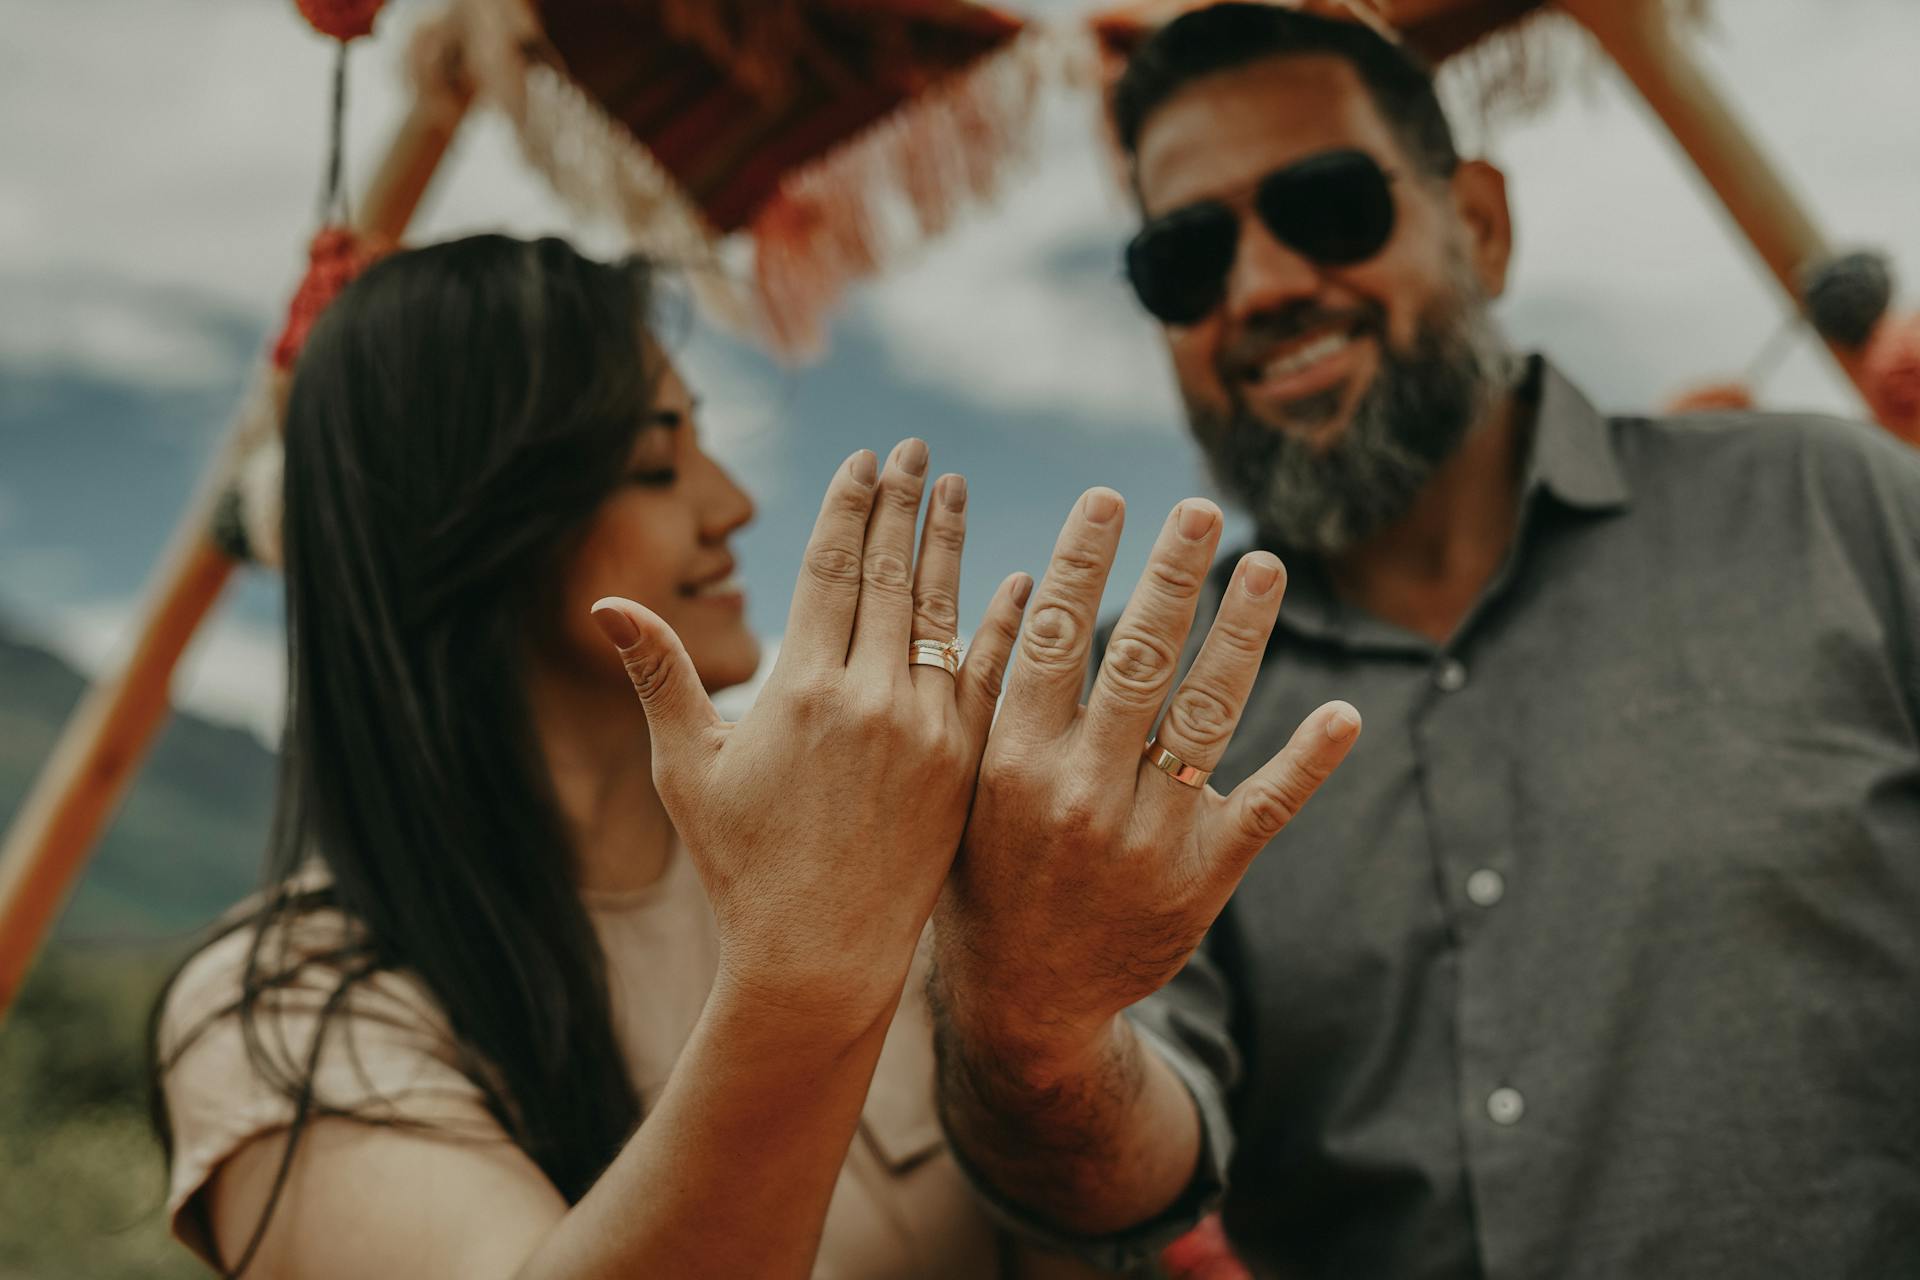 A smiling couple holding their hands out | Source: Pexels